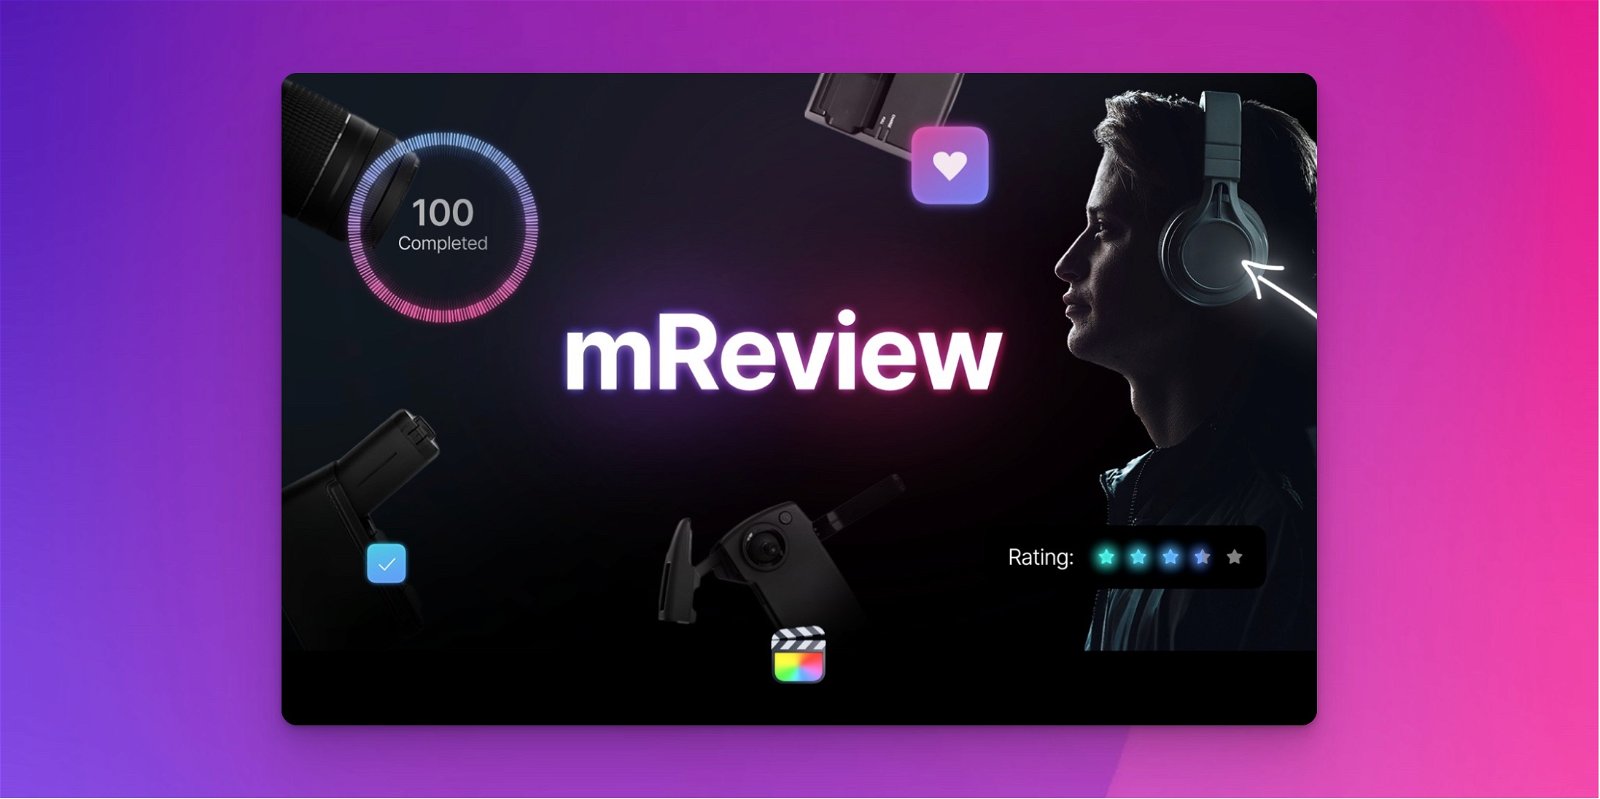 mReview